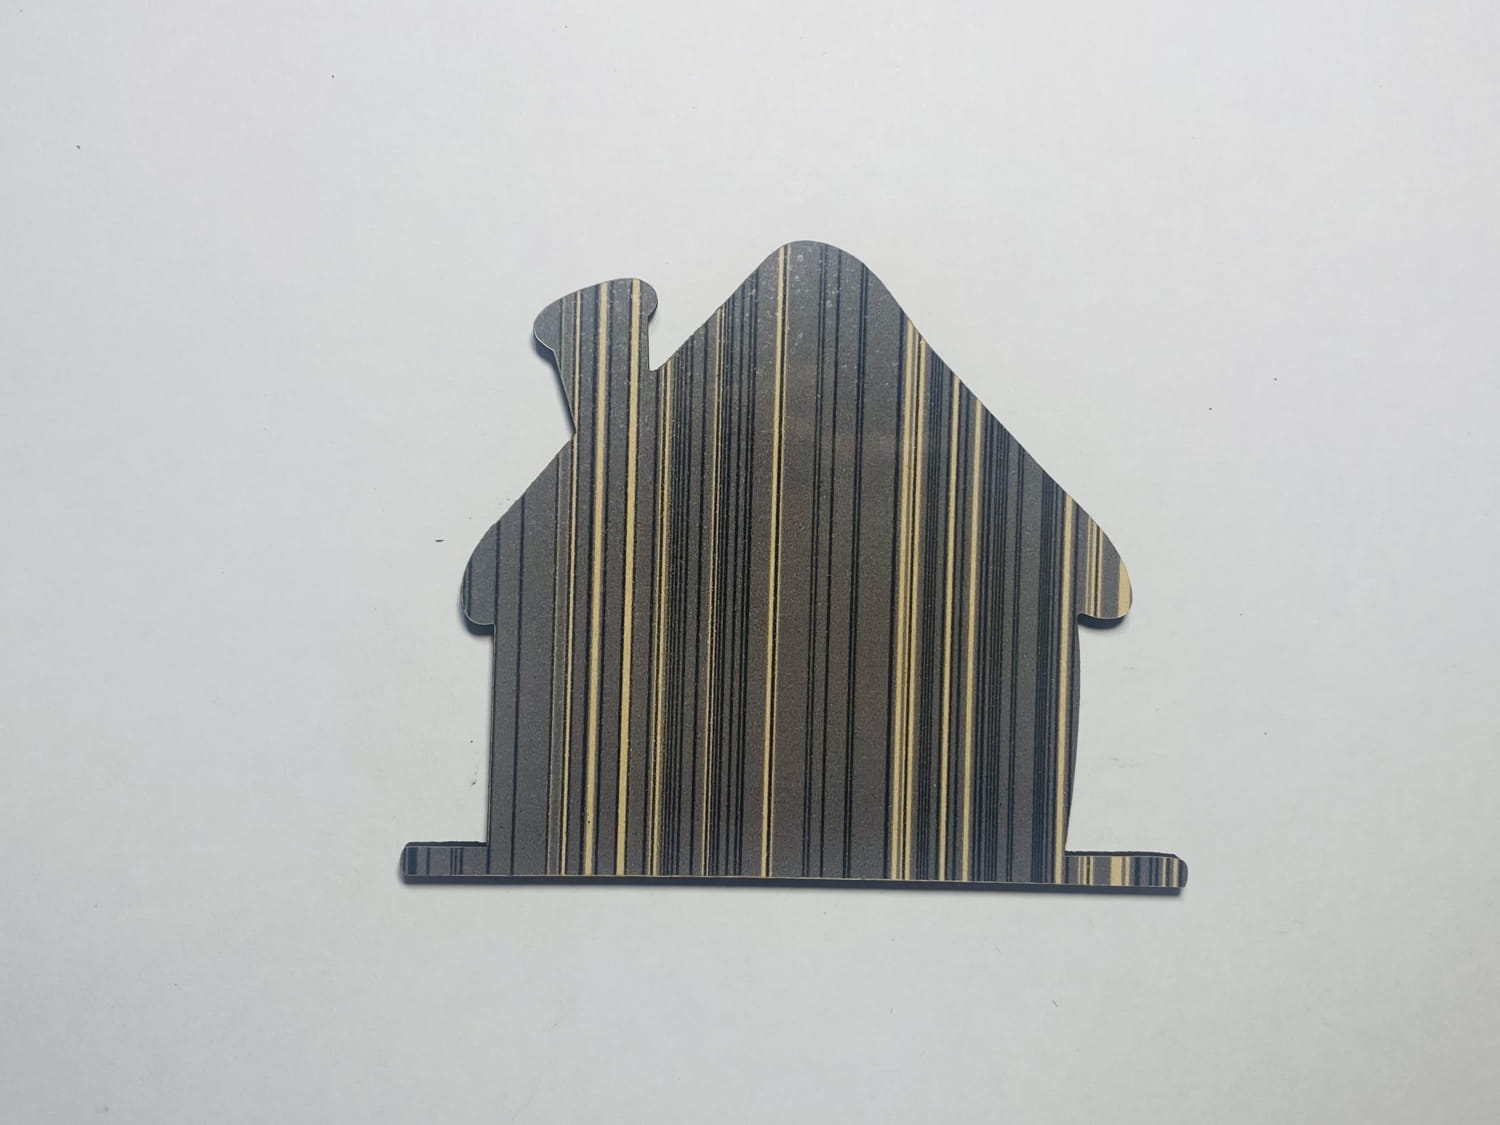 Laser Cut Wood House Cutout Unfinished Wood House Shape Free Vector